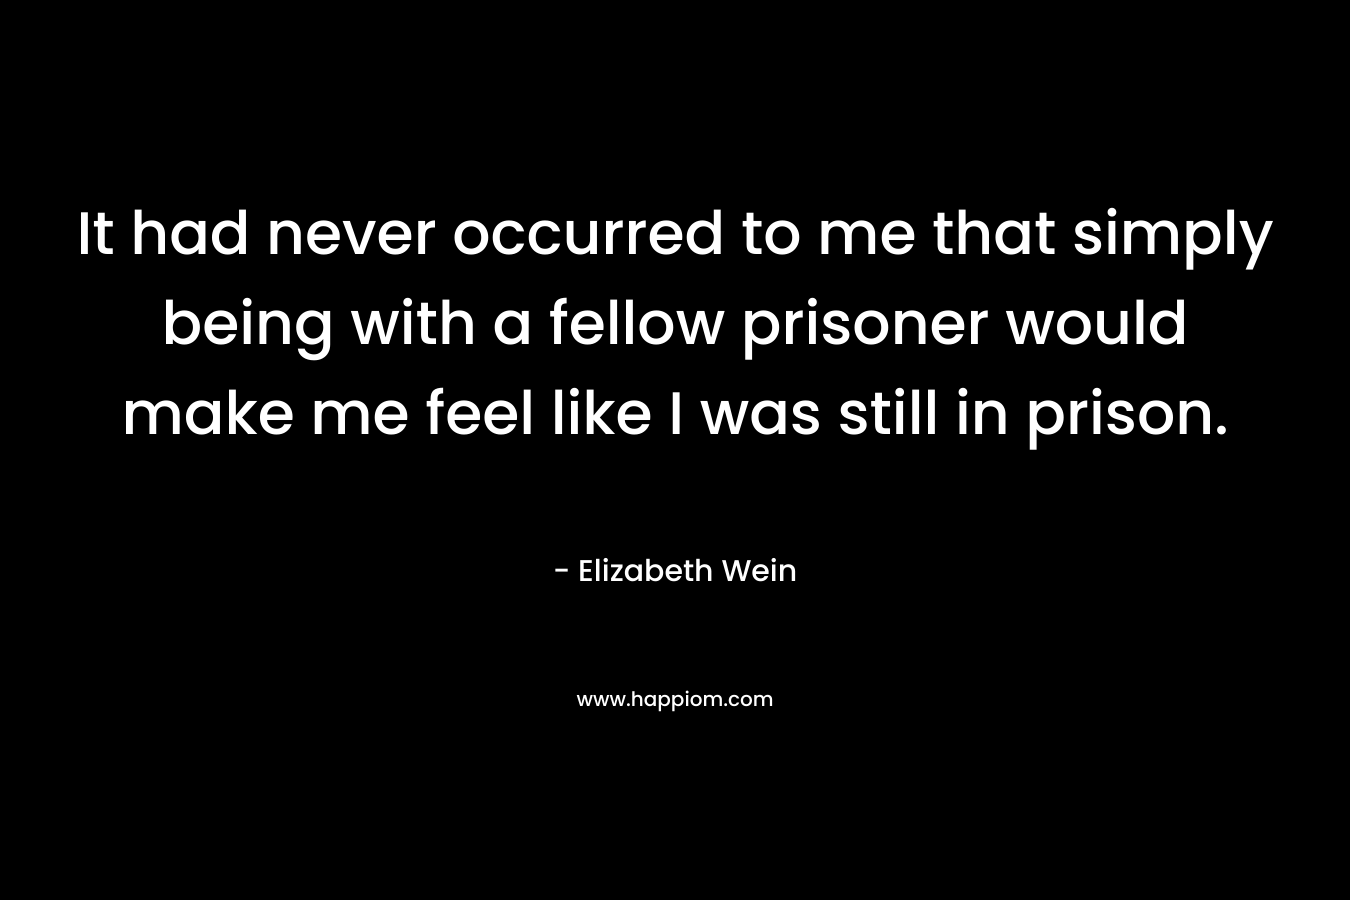 It had never occurred to me that simply being with a fellow prisoner would make me feel like I was still in prison.